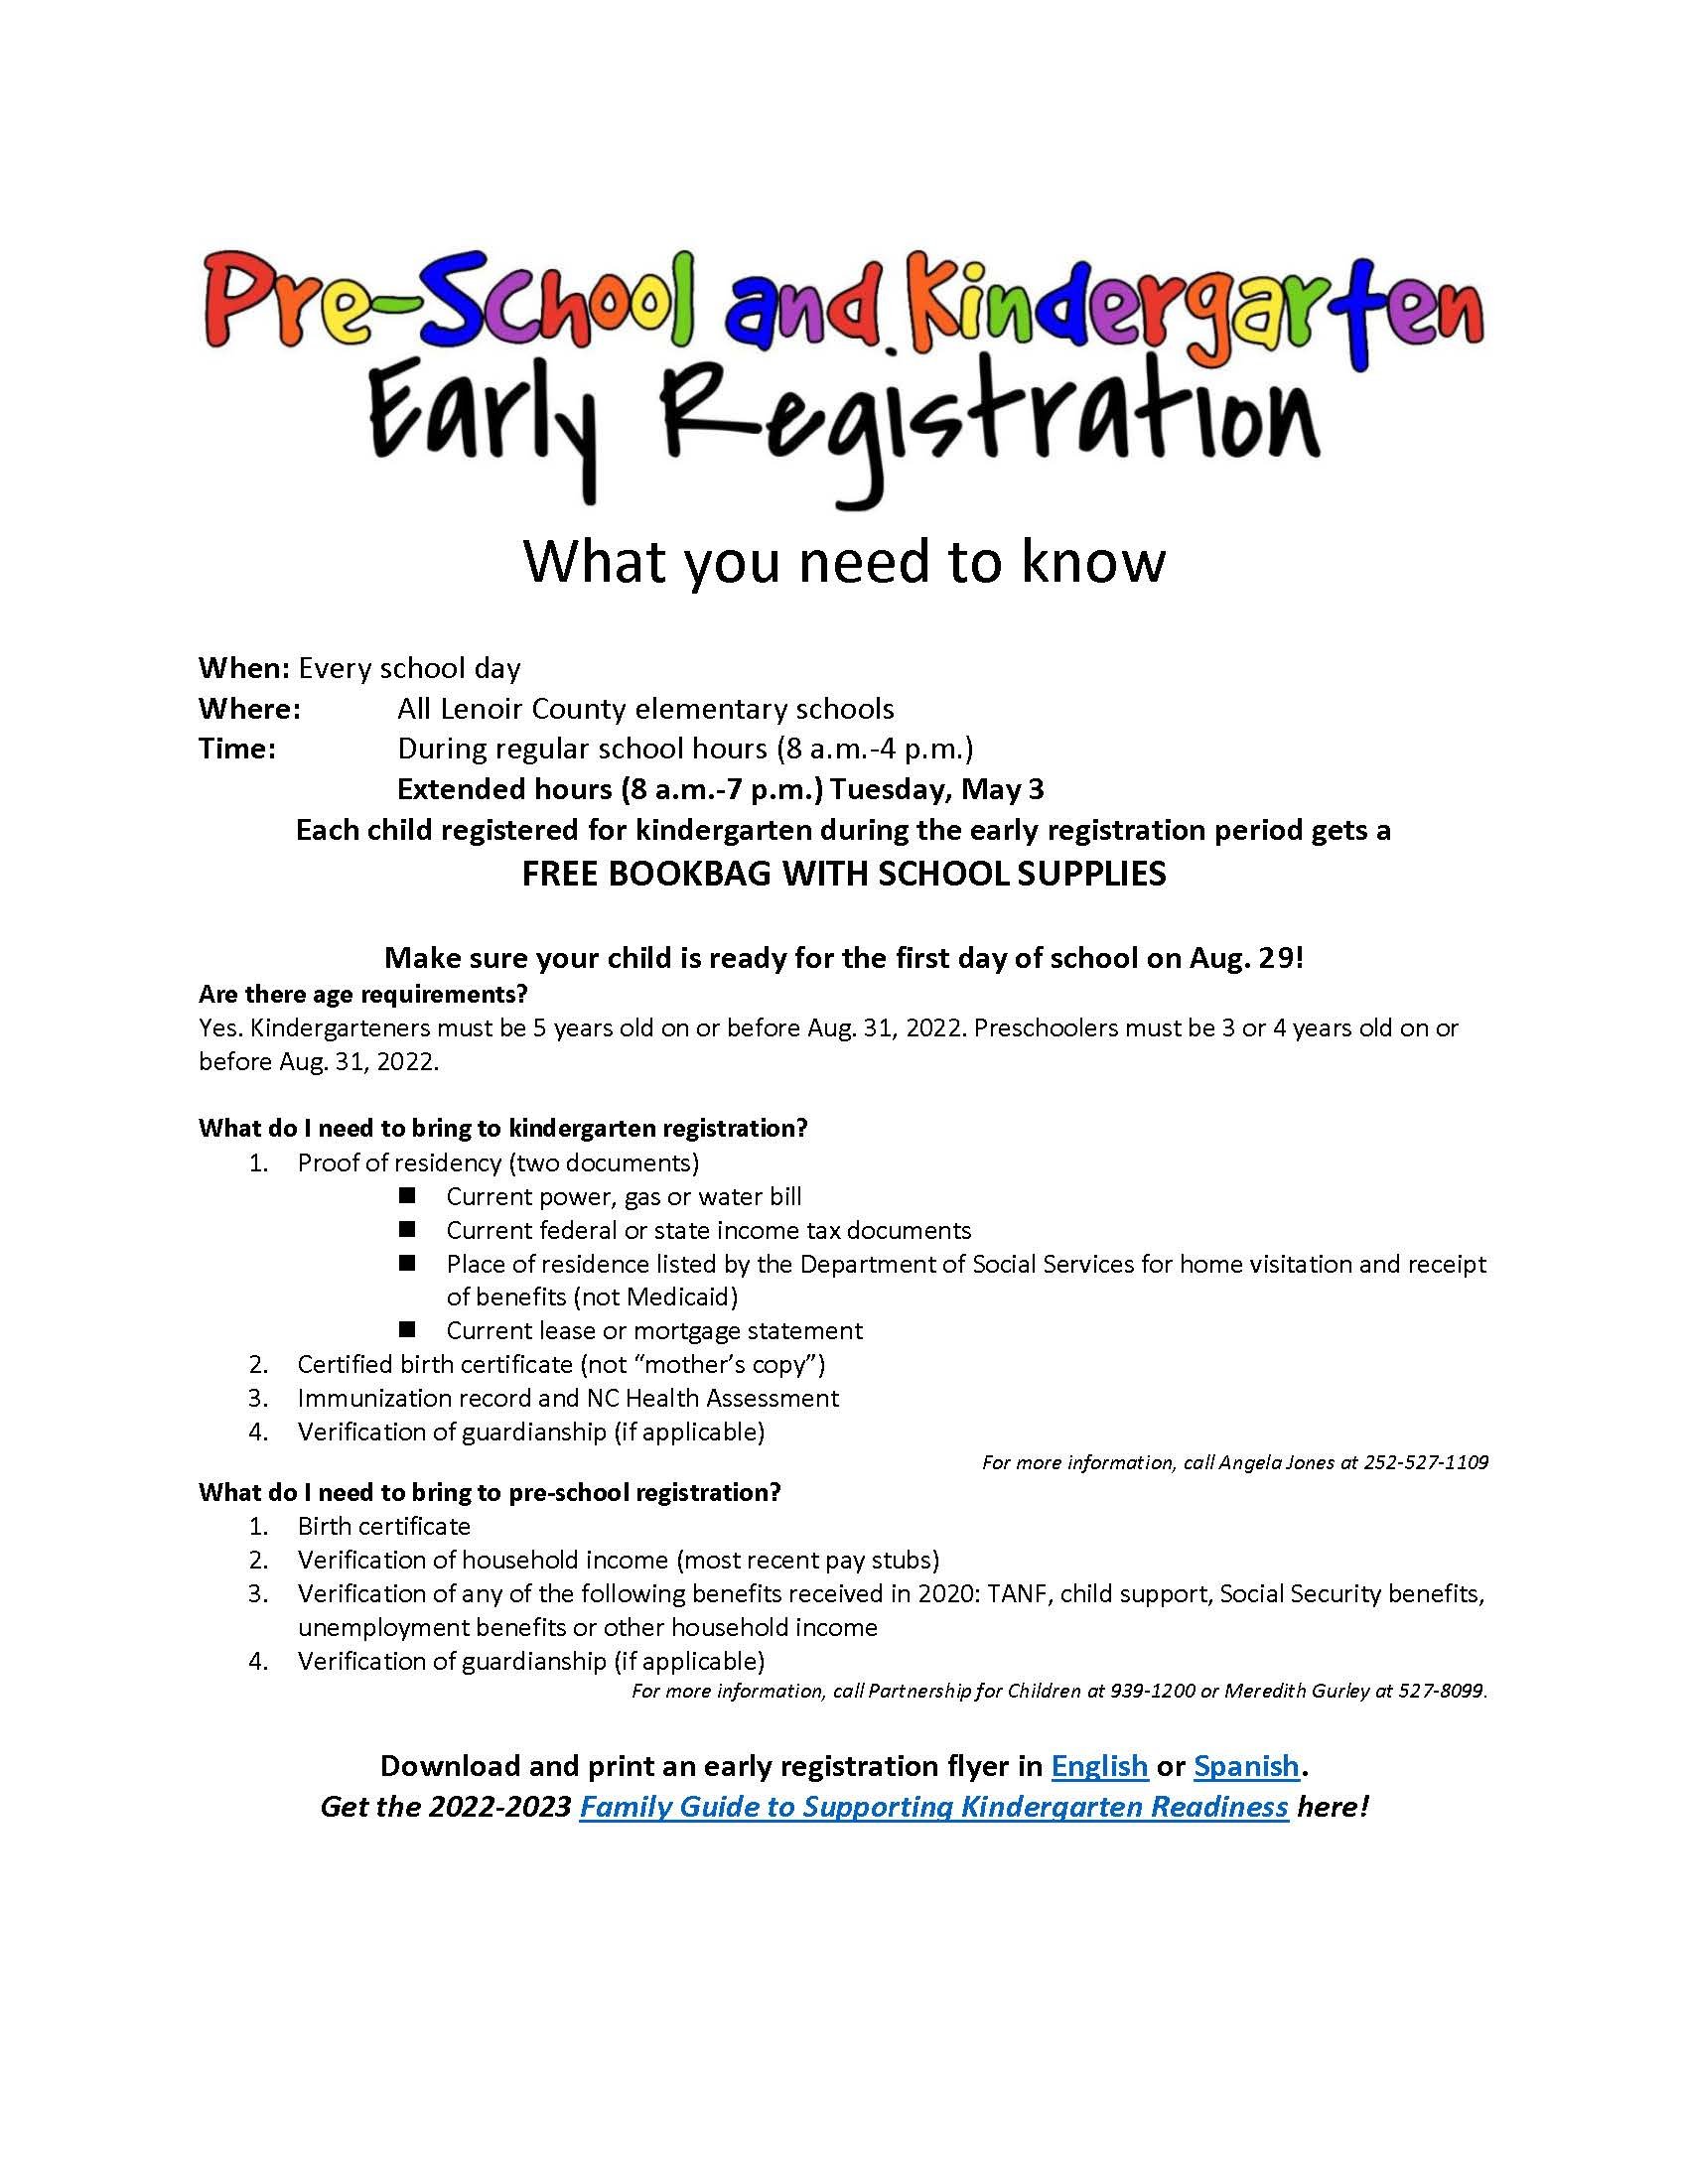 Pre-School and Kindergarten early registration: What you need to know ...